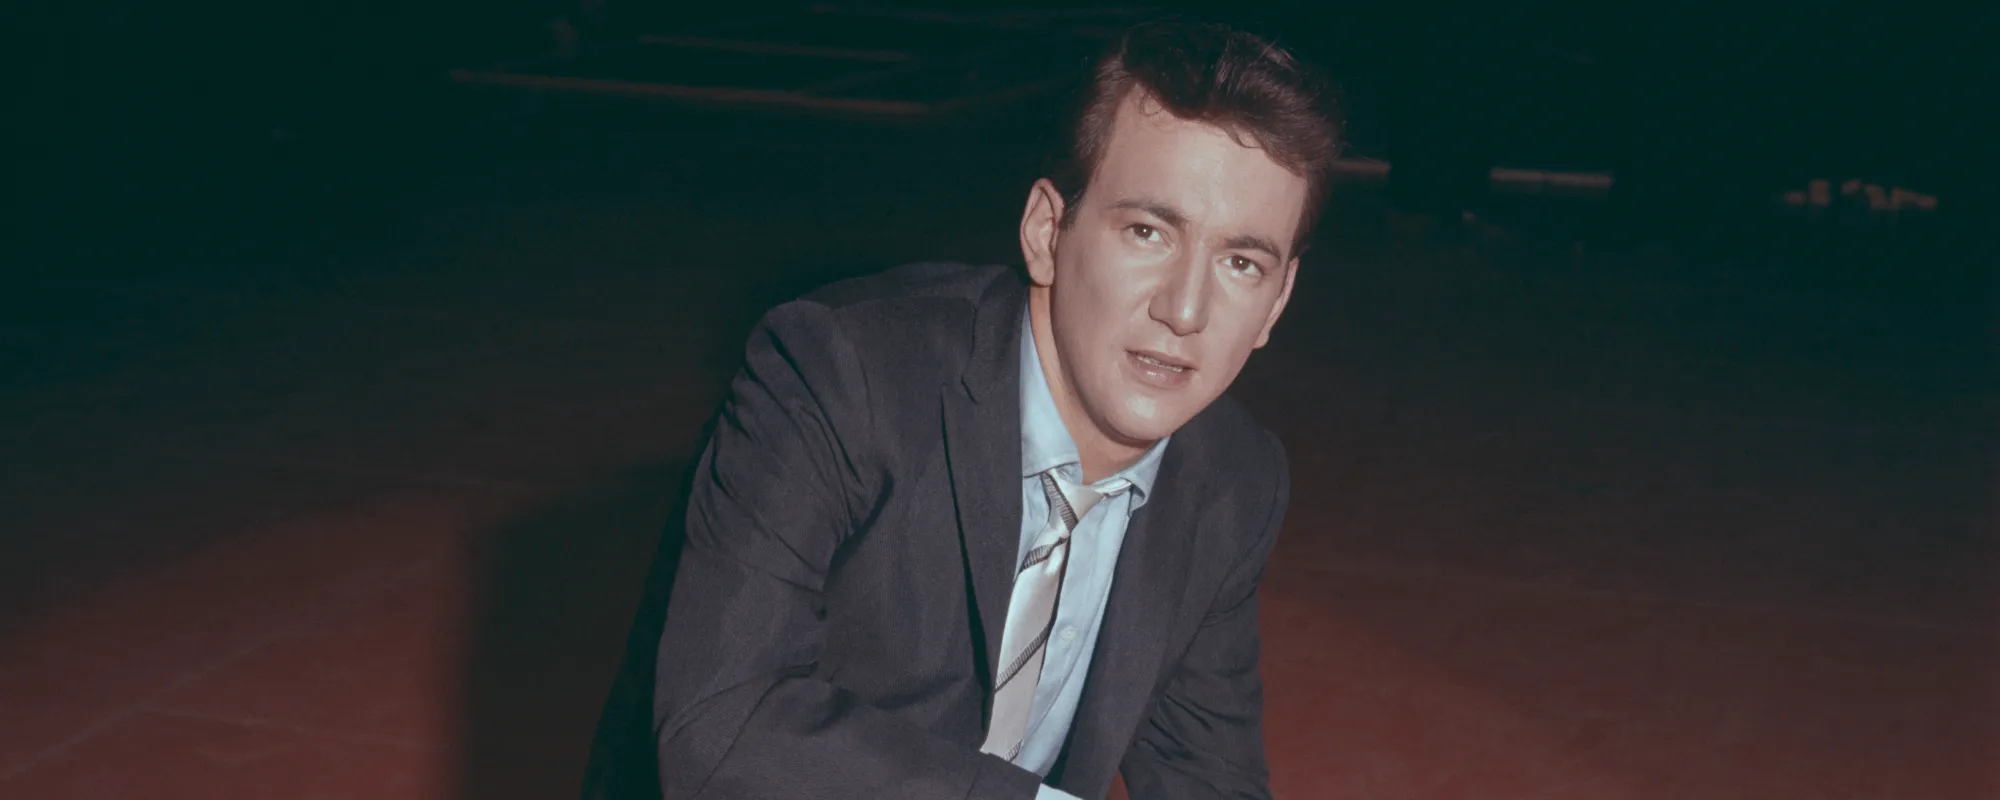 Behind the Violent Origins and Chart-Topping Success of “Mack the Knife” by Bobby Darin